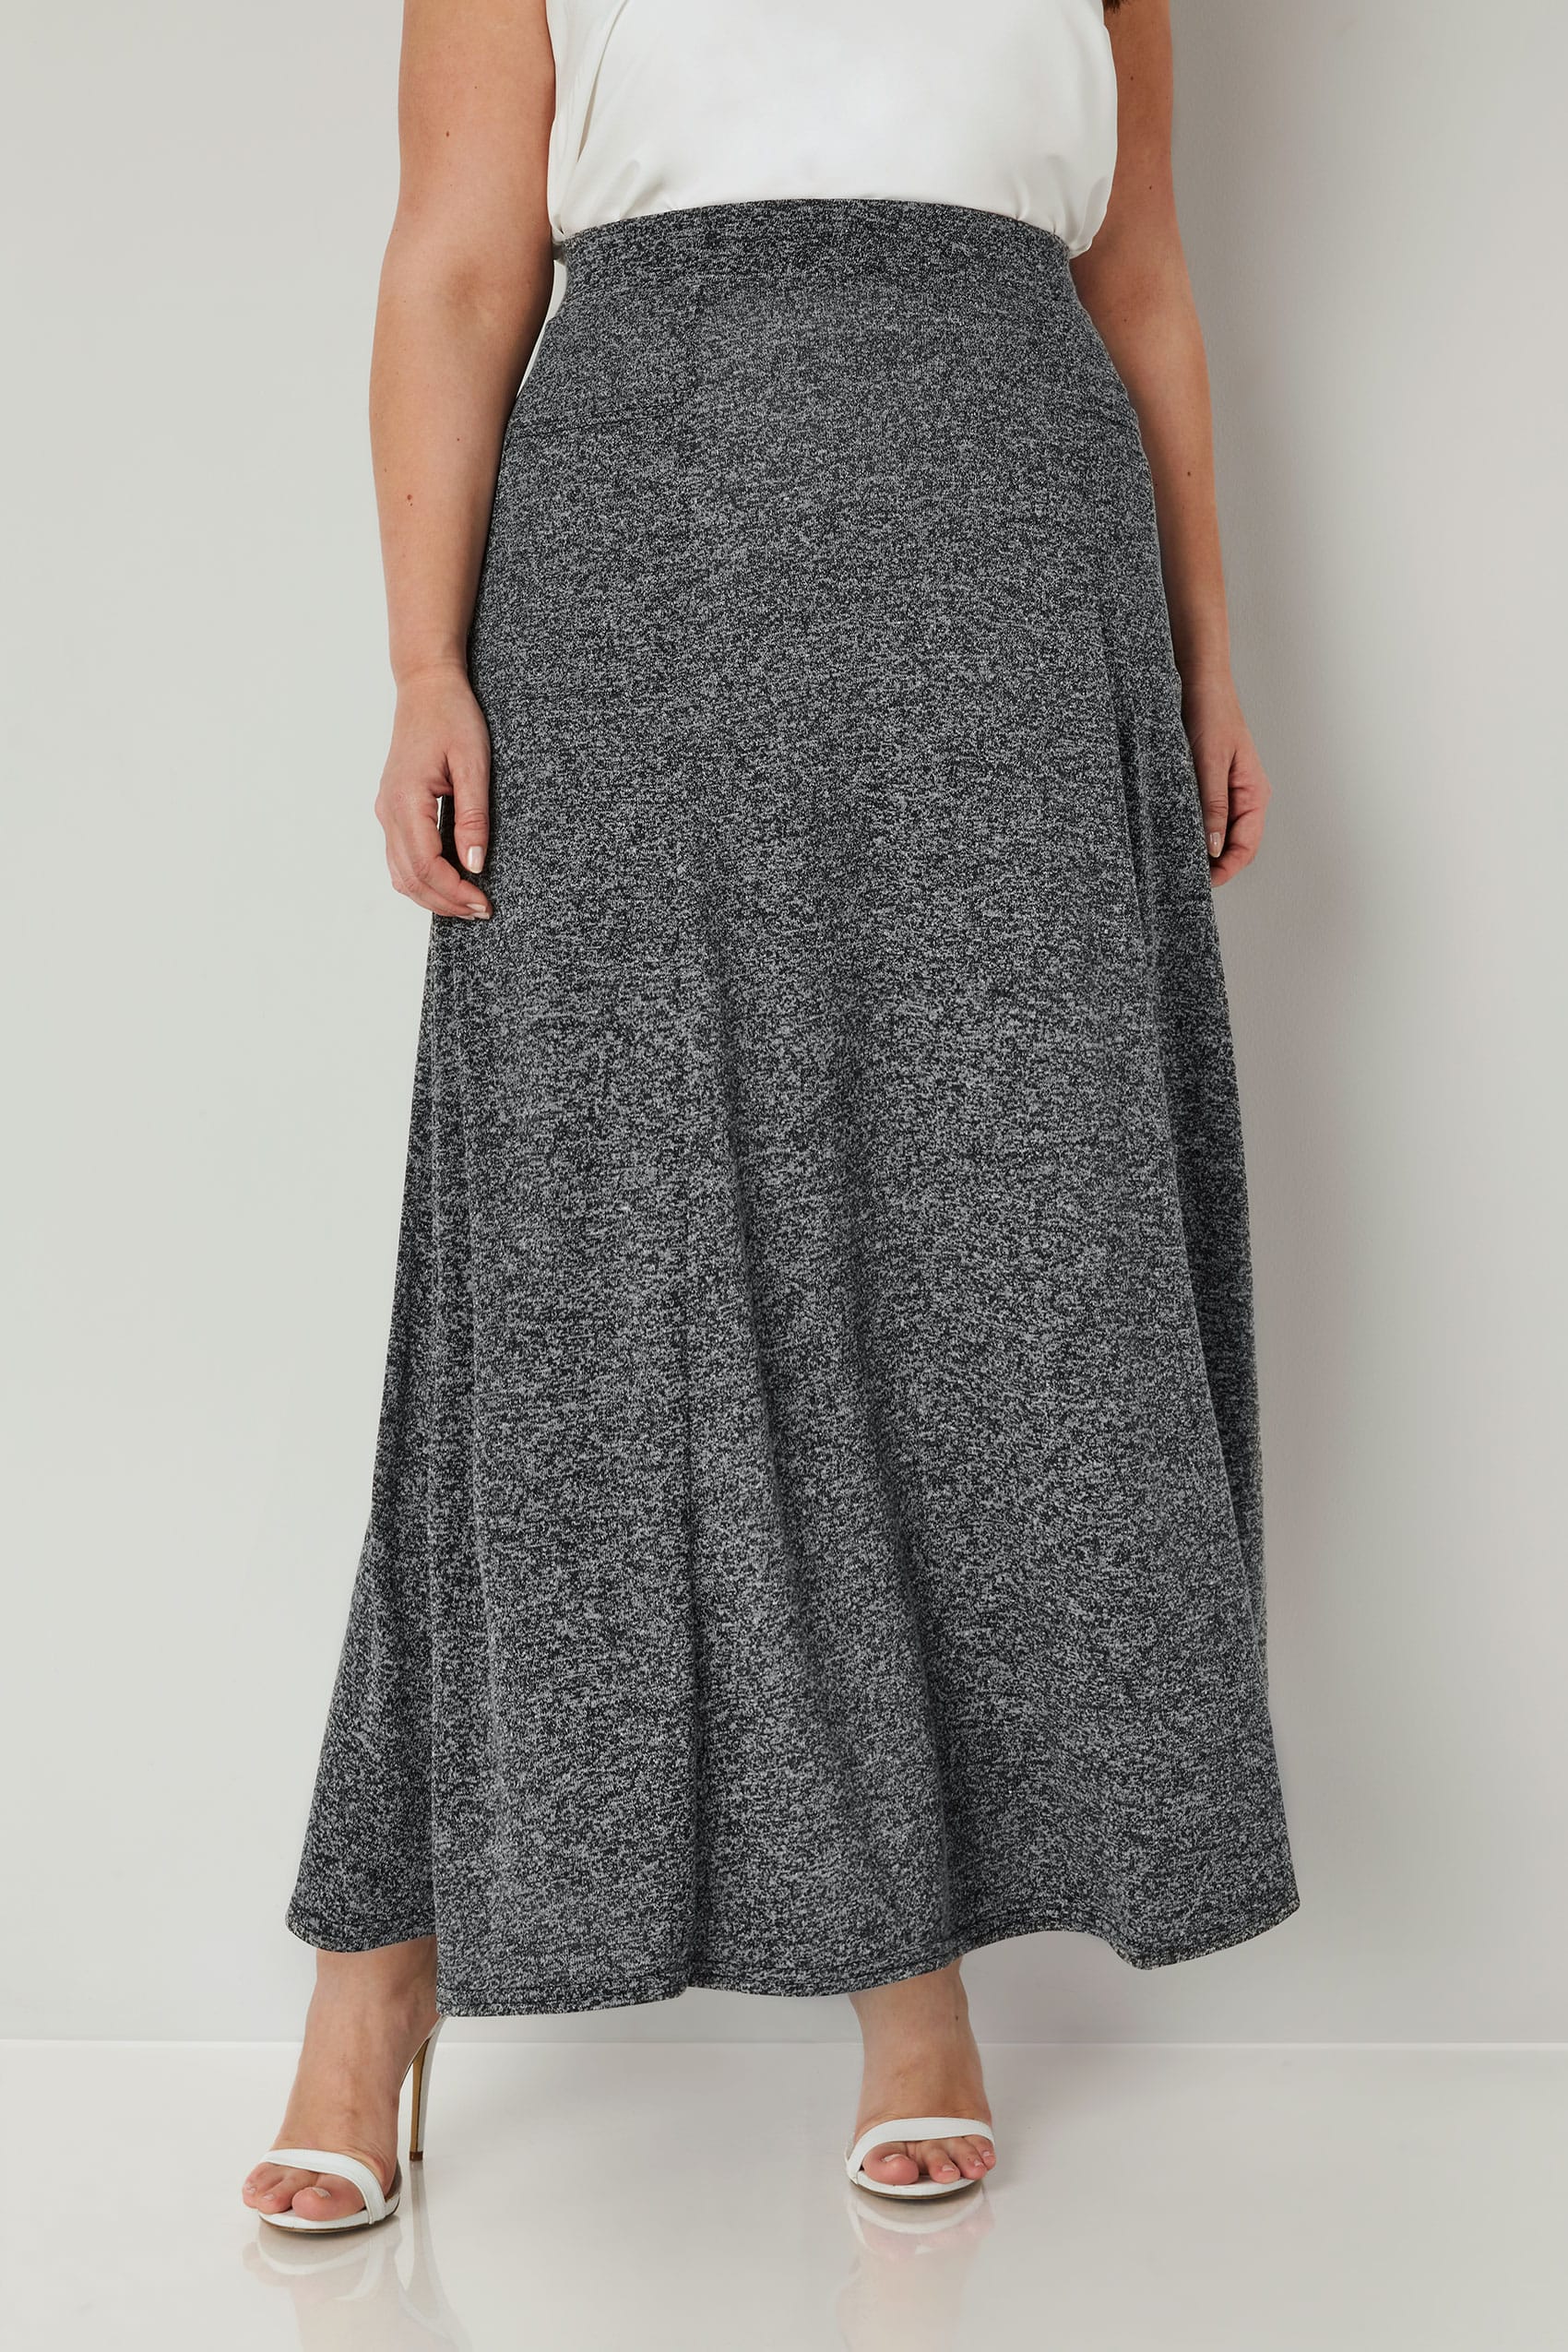 Grey Knitted Maxi Skirt With Pockets , Plus size 16 to 36